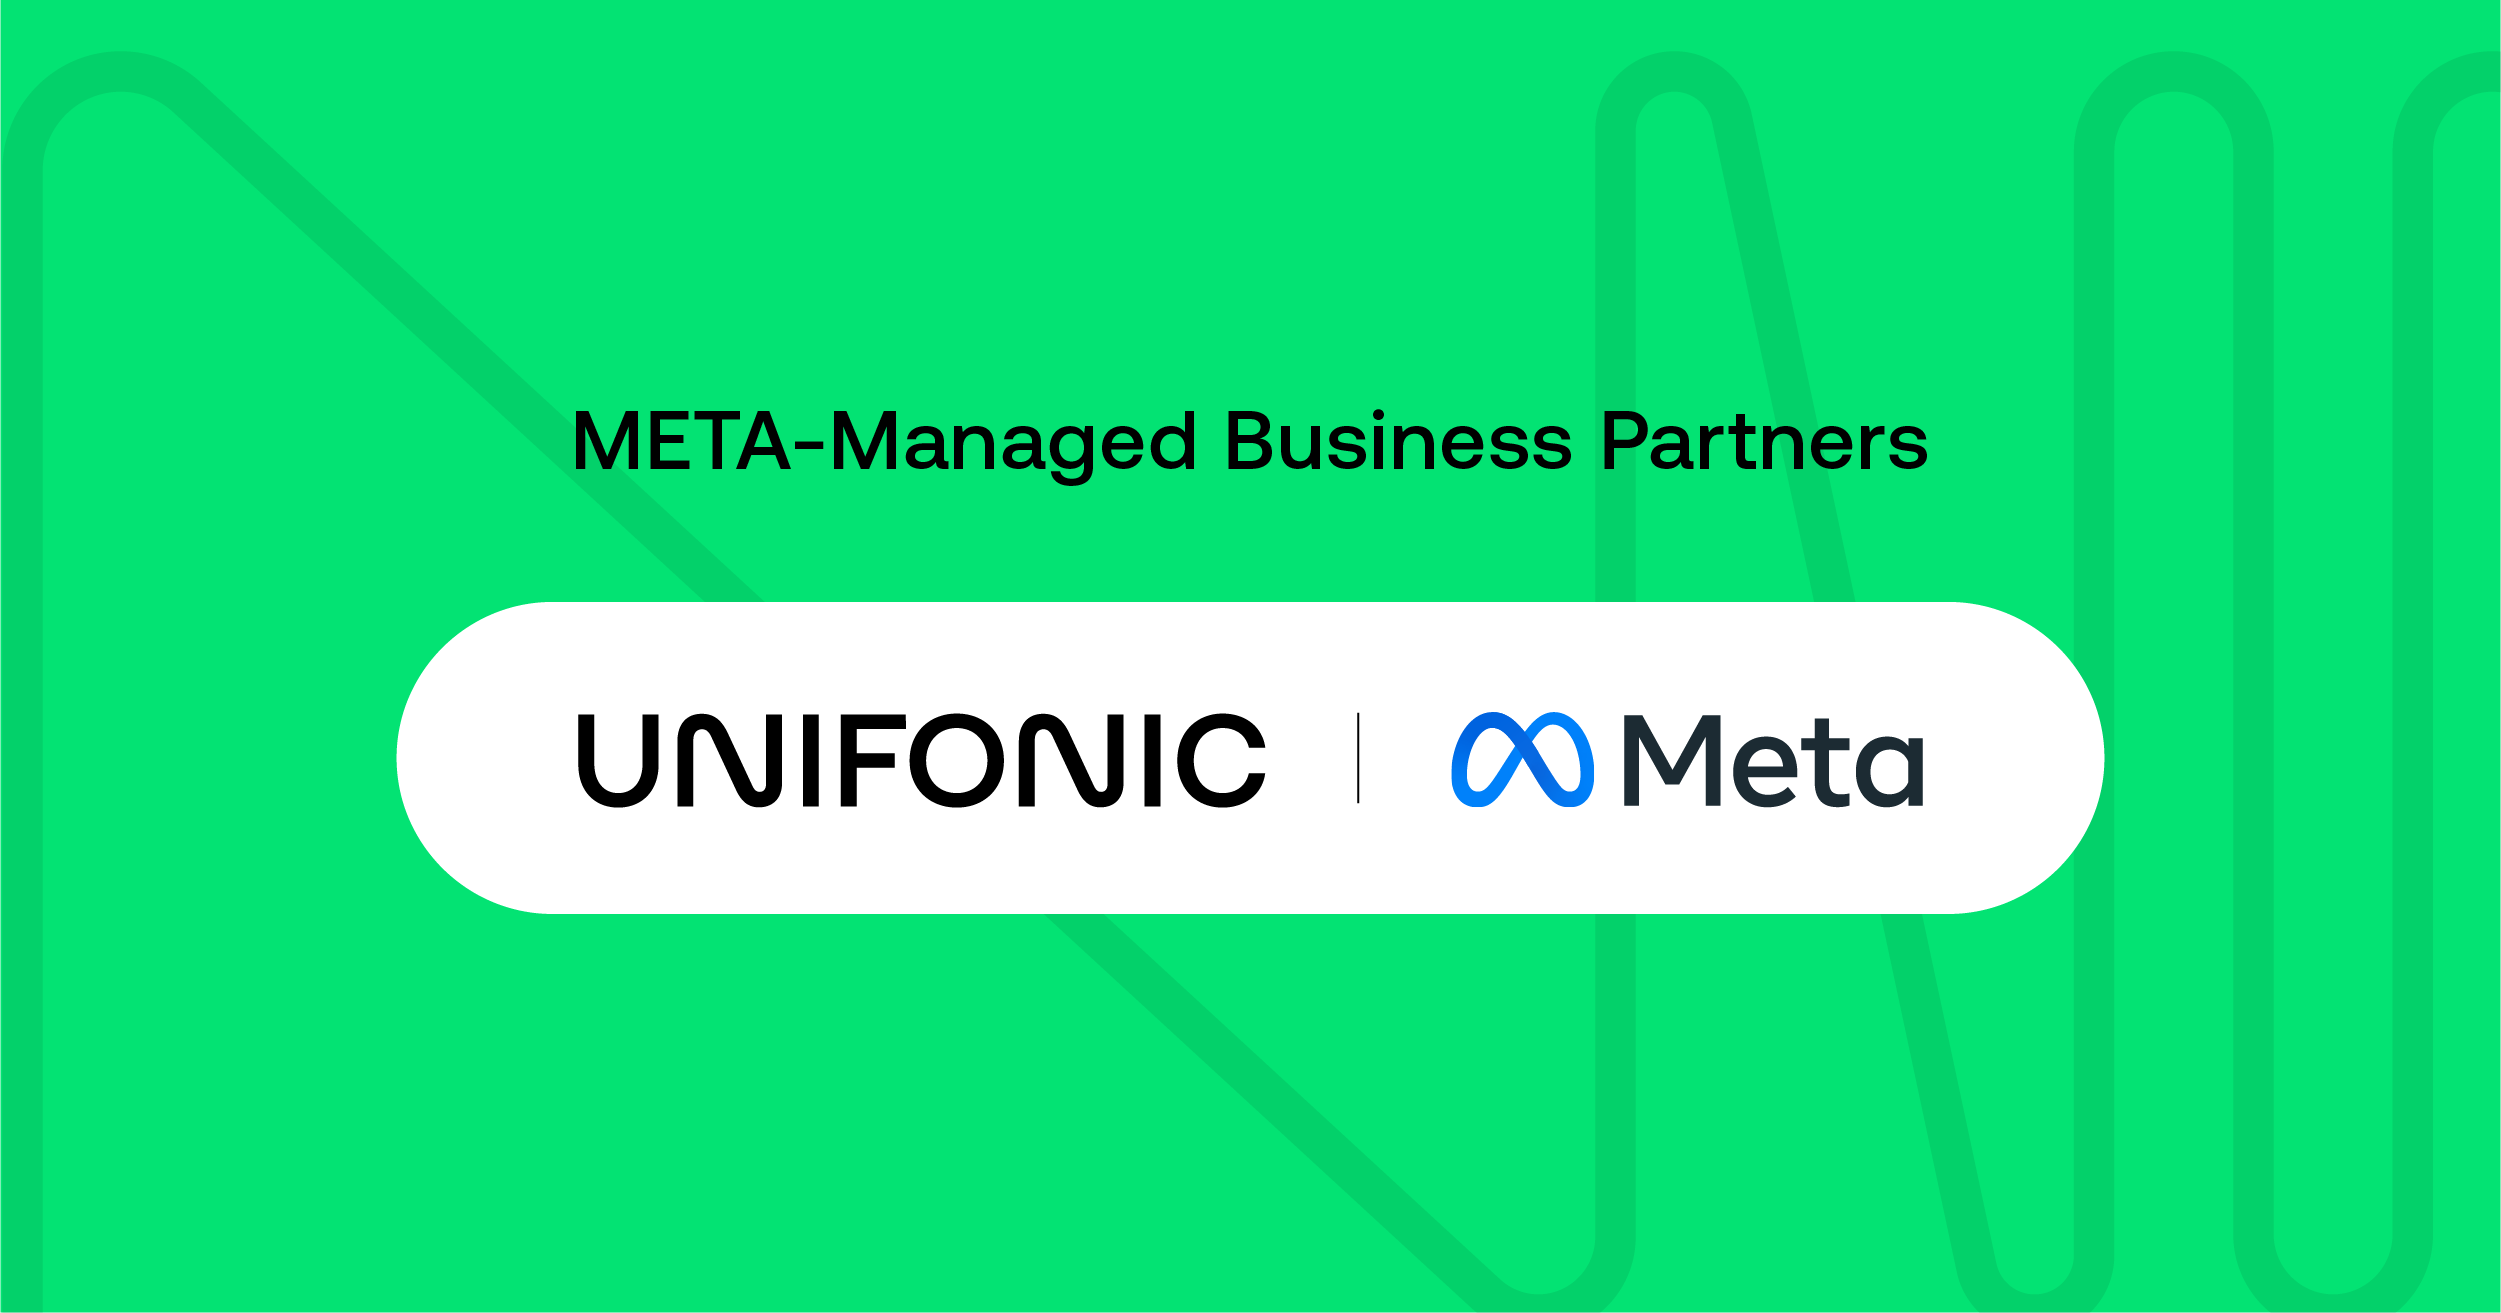 Unifonic announced as a META-Managed Business Partner